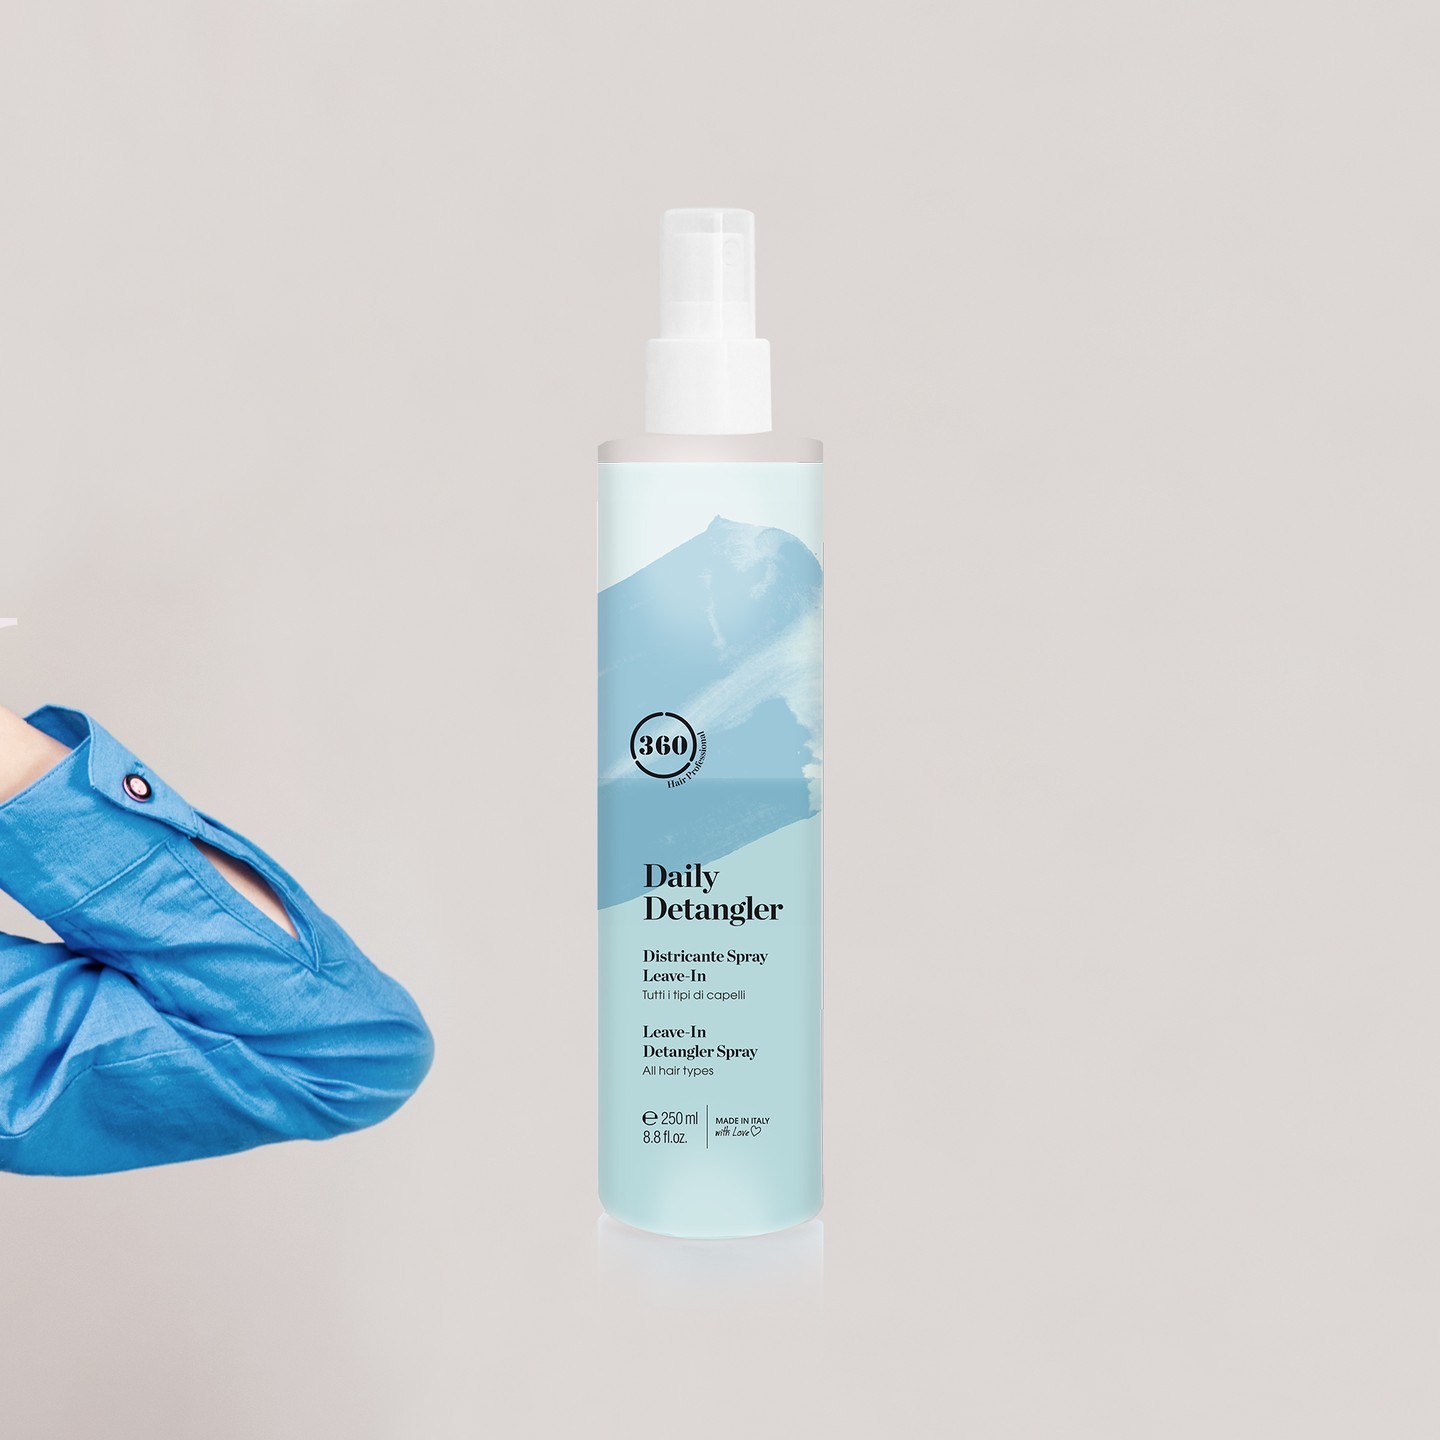 Daily Detangler is our two-phase rebalancing spray without rinsing. It detangles and revitalizes all hair types without weighing it down. Enriched with conditioning actives, it leaves hair easier to comb and protects against the use of heat, strengthening and hydrating it. For light and easy-to-detangle hair.
.
.
.
Spray riequilibrante bifasico senza risciacquo. Districa e rivitalizza tutti i tipi di capelli senza appesantire. Arricchito con attivi condizionanti migliora la pettinabilità e protegge dall’uso degli strumenti a caldo, donando forza e idratazione. Per capelli leggeri e facili da districare.
.
.
.
#360hair #360hairprofessional
#360hairproducts
#madeinitalywithlove